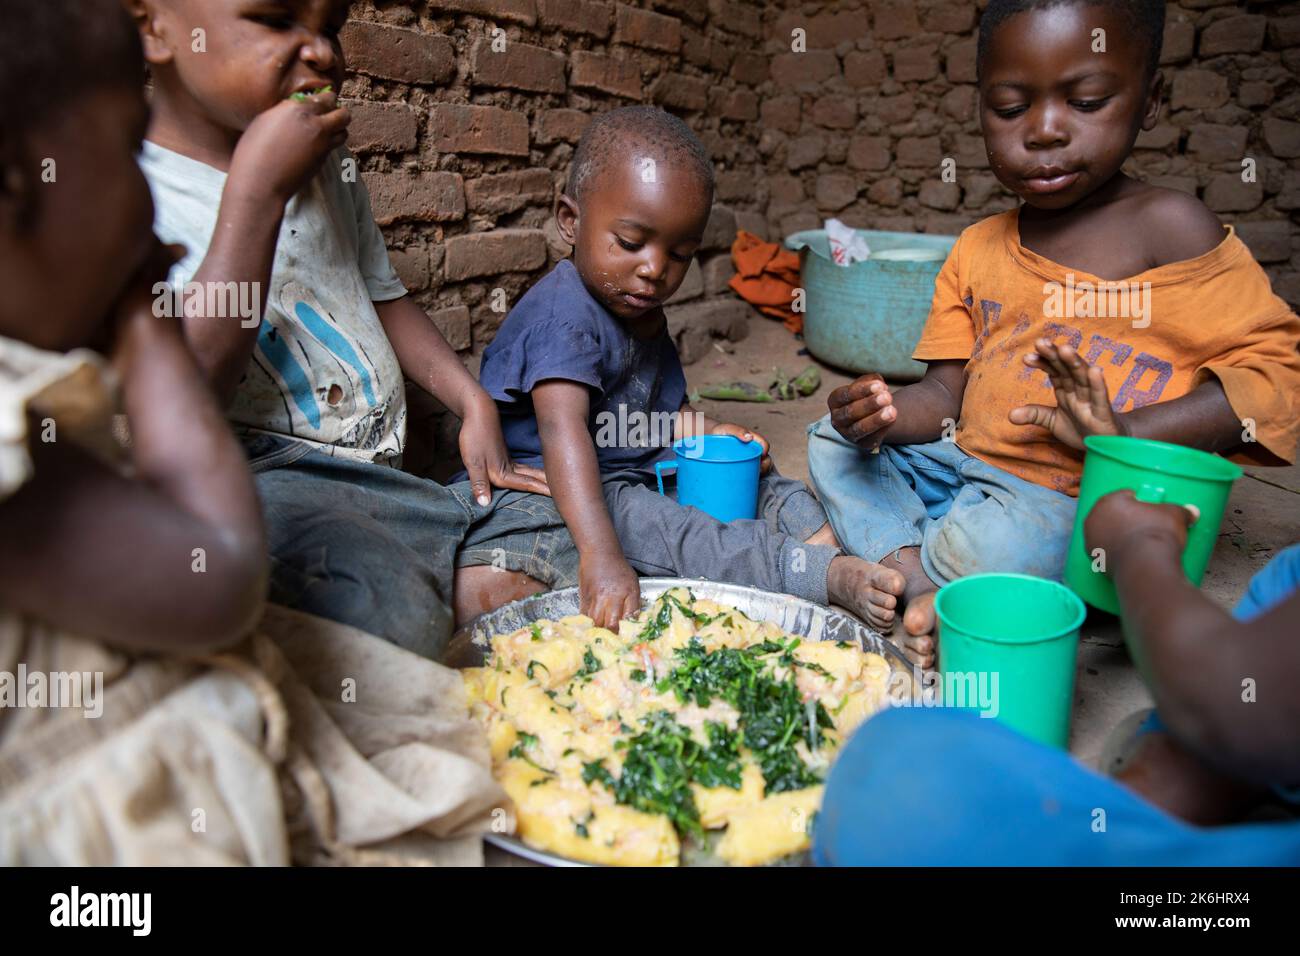 A group of African children eat a meal of starchy bananas and greens with peanut sauce inside their home in Kasese District, Uganda, East Africa. Stock Photo